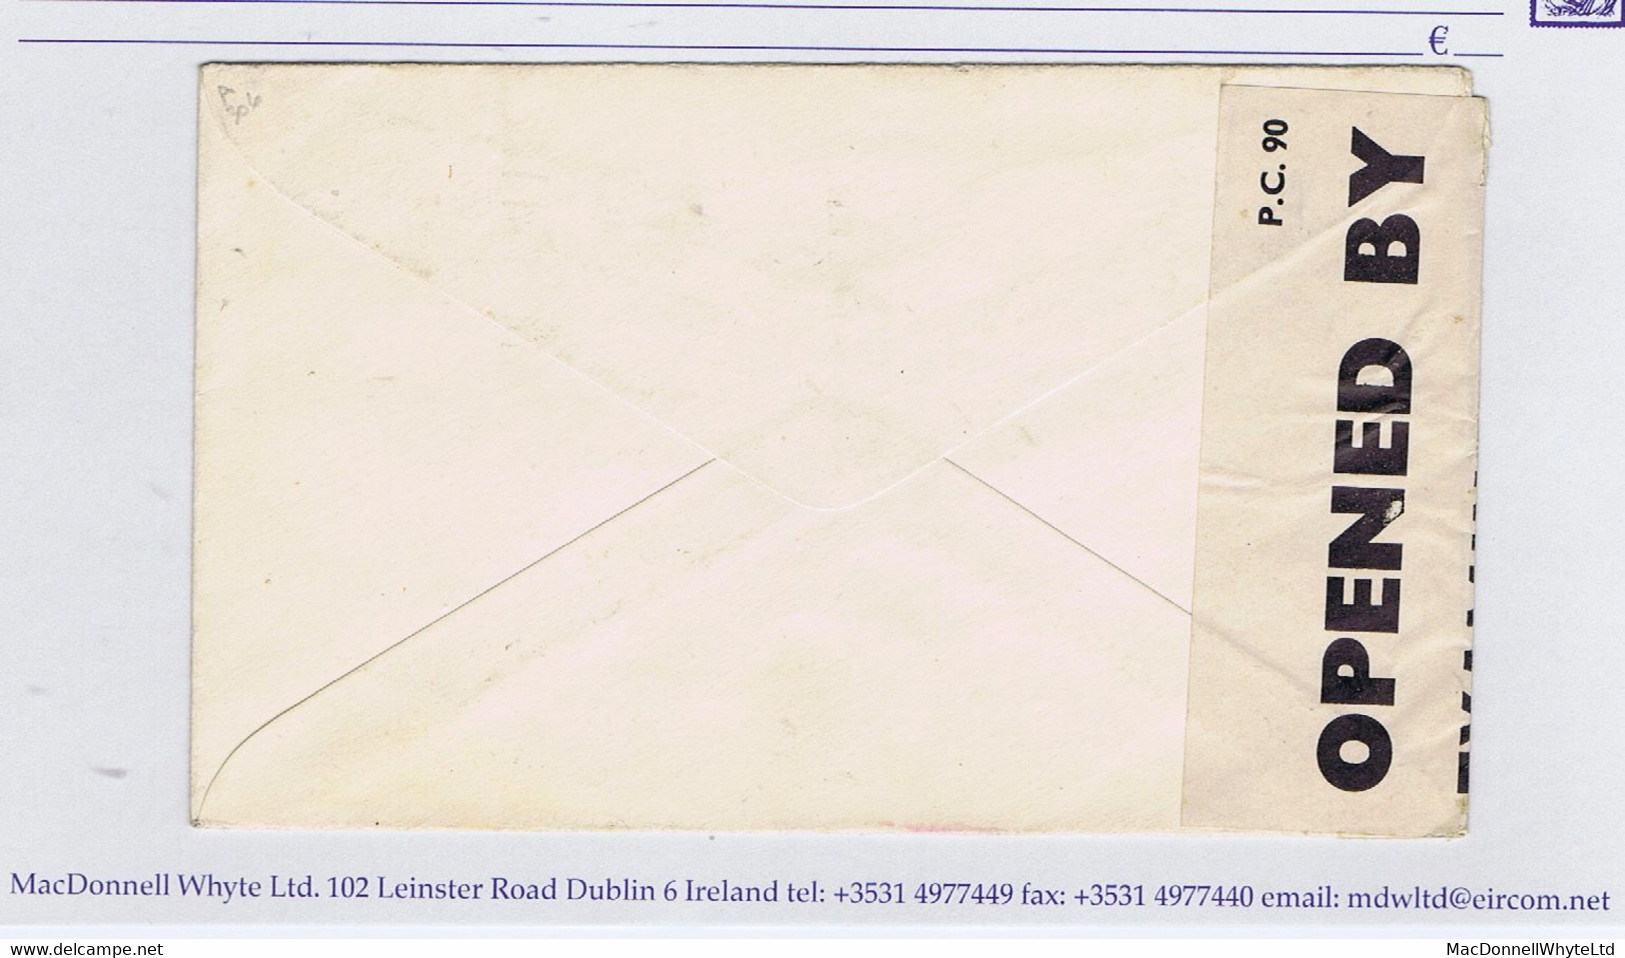 Ireland Airmail Censor Acceleration 1941 Liverpool To Belfast Wartime Civilian First Flight, Cover St Albans Paid 3d Air - Posta Aerea